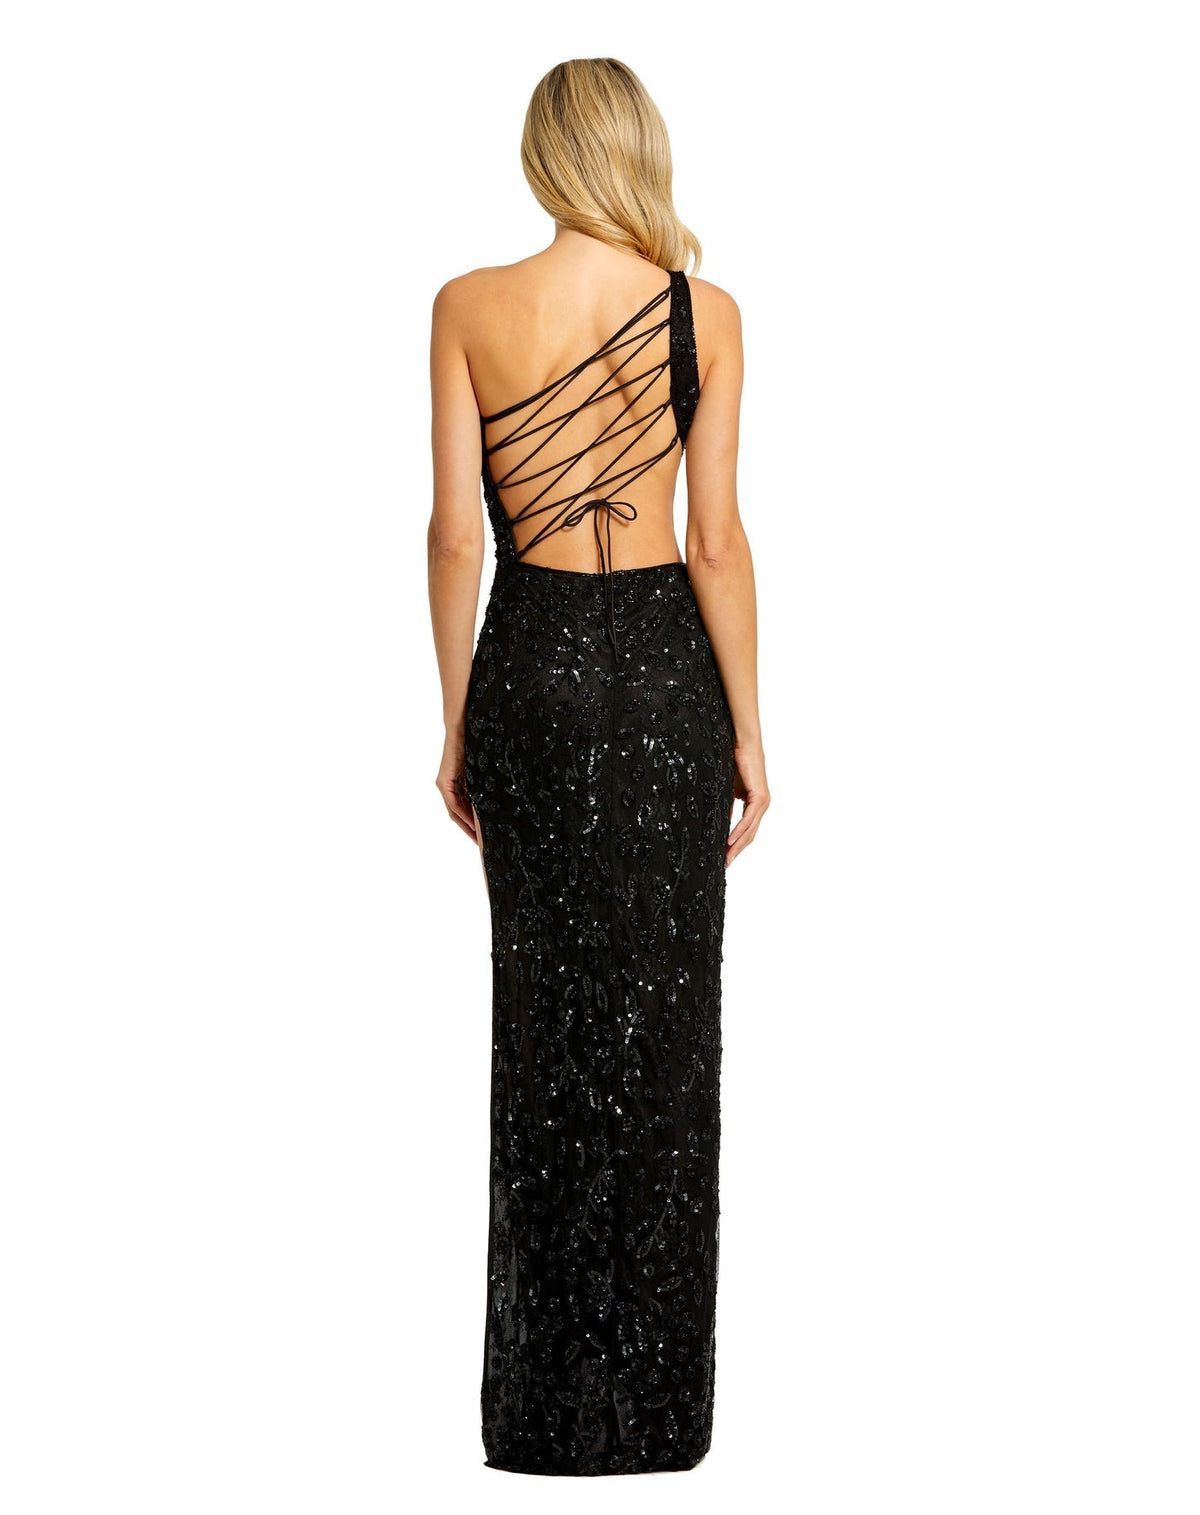 Mac Duggal, Asymmetric one shoulder lace back sequin gown - Black, Style #6084 back view